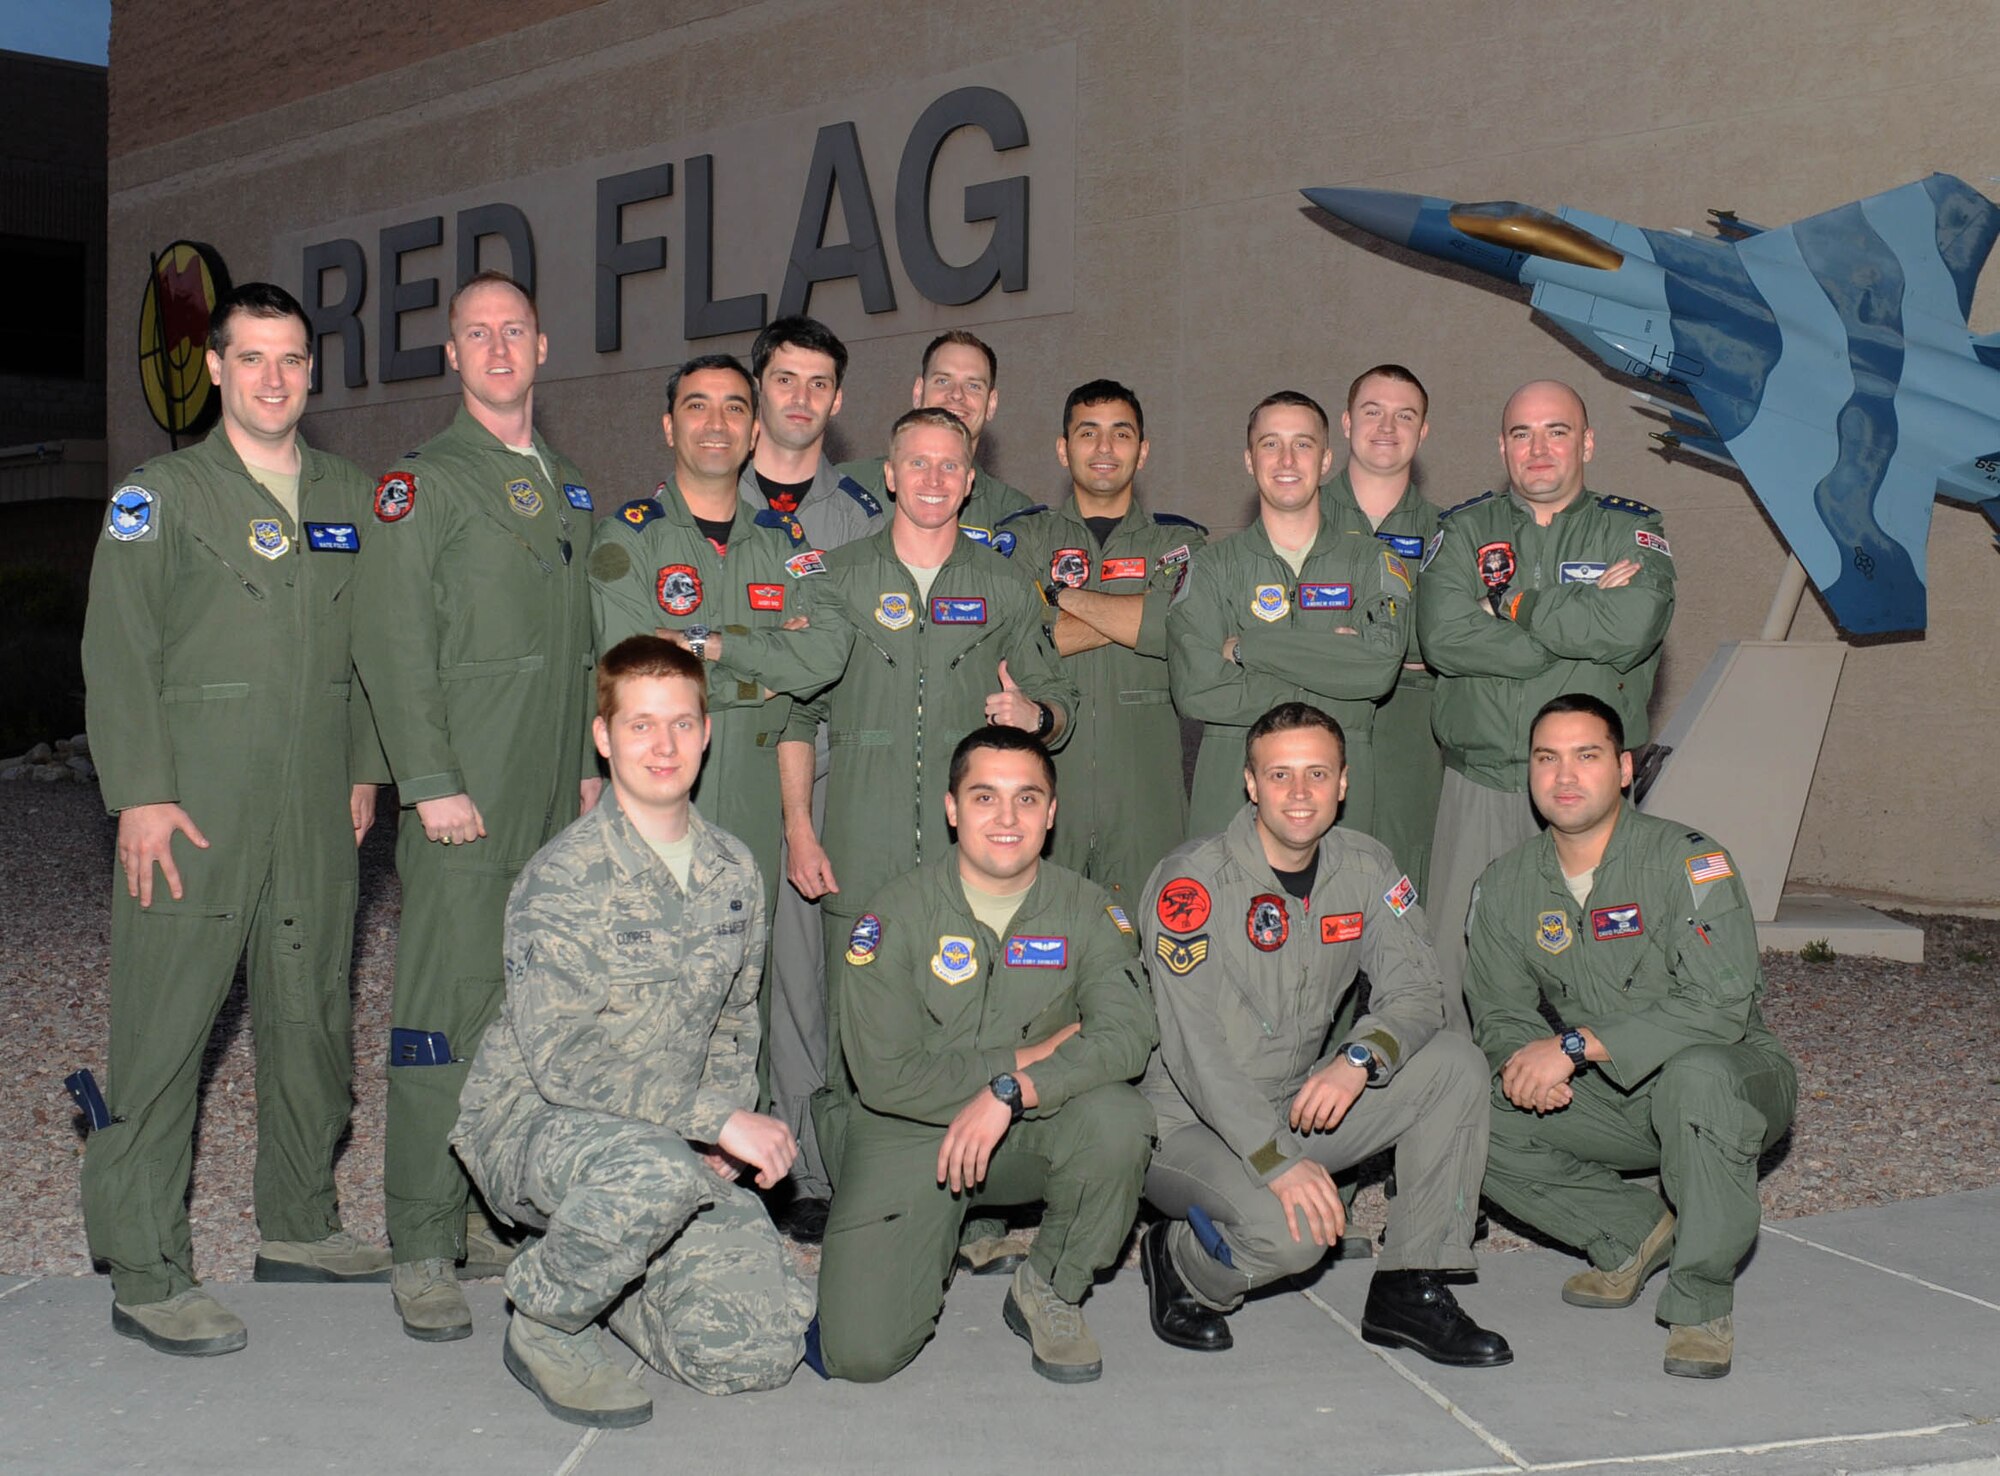 U.S. and Turkish air force crews pose for a photo, March 8, 2016, at Nellis Air Force Base, Nev., after their successful formation flights. The U.S. Air Force and the Turkish air force flew KC-135 Stratotankers together in formation for the first time in their histories during Red Flag 16-2. (U.S. Air Force photo/Senior Airman David Bernal Del Agua)